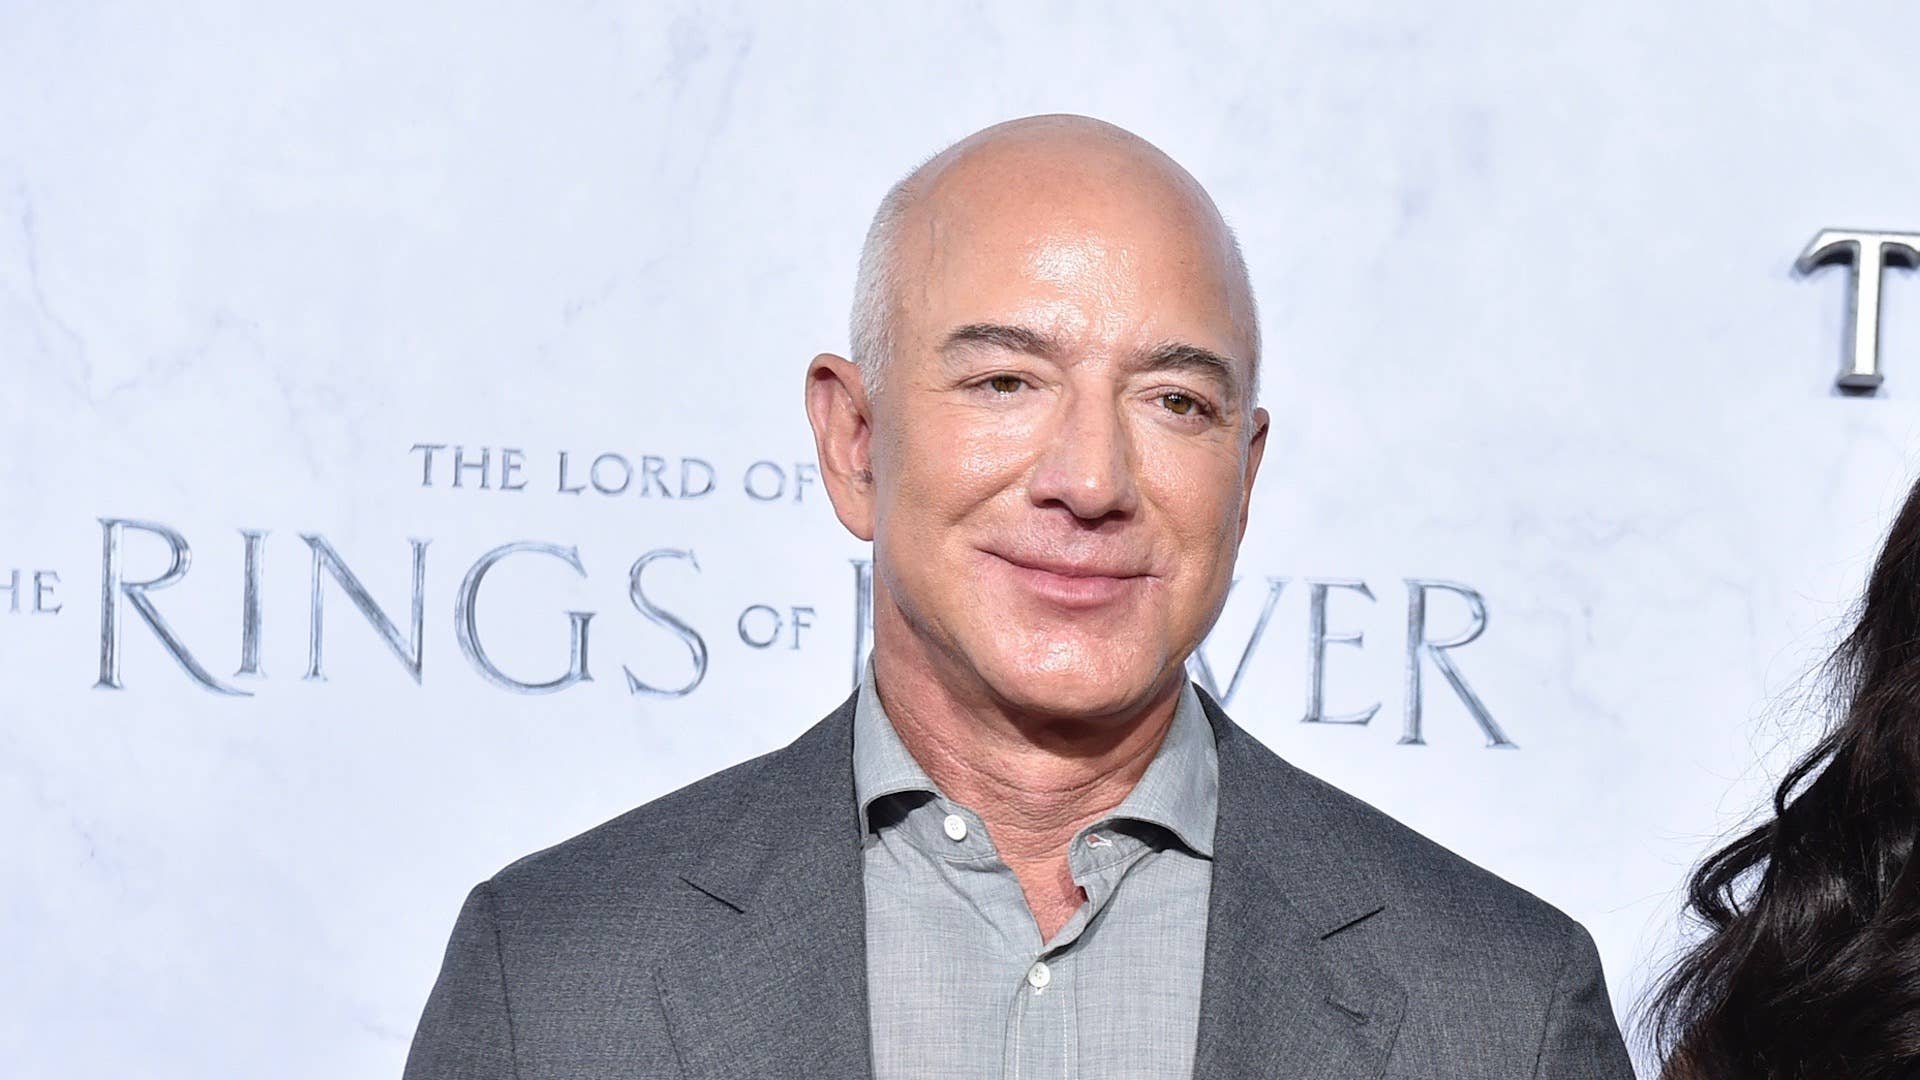 Jeff Bezos attends 'The Lord of The Rings: The Rings of Power' premiere